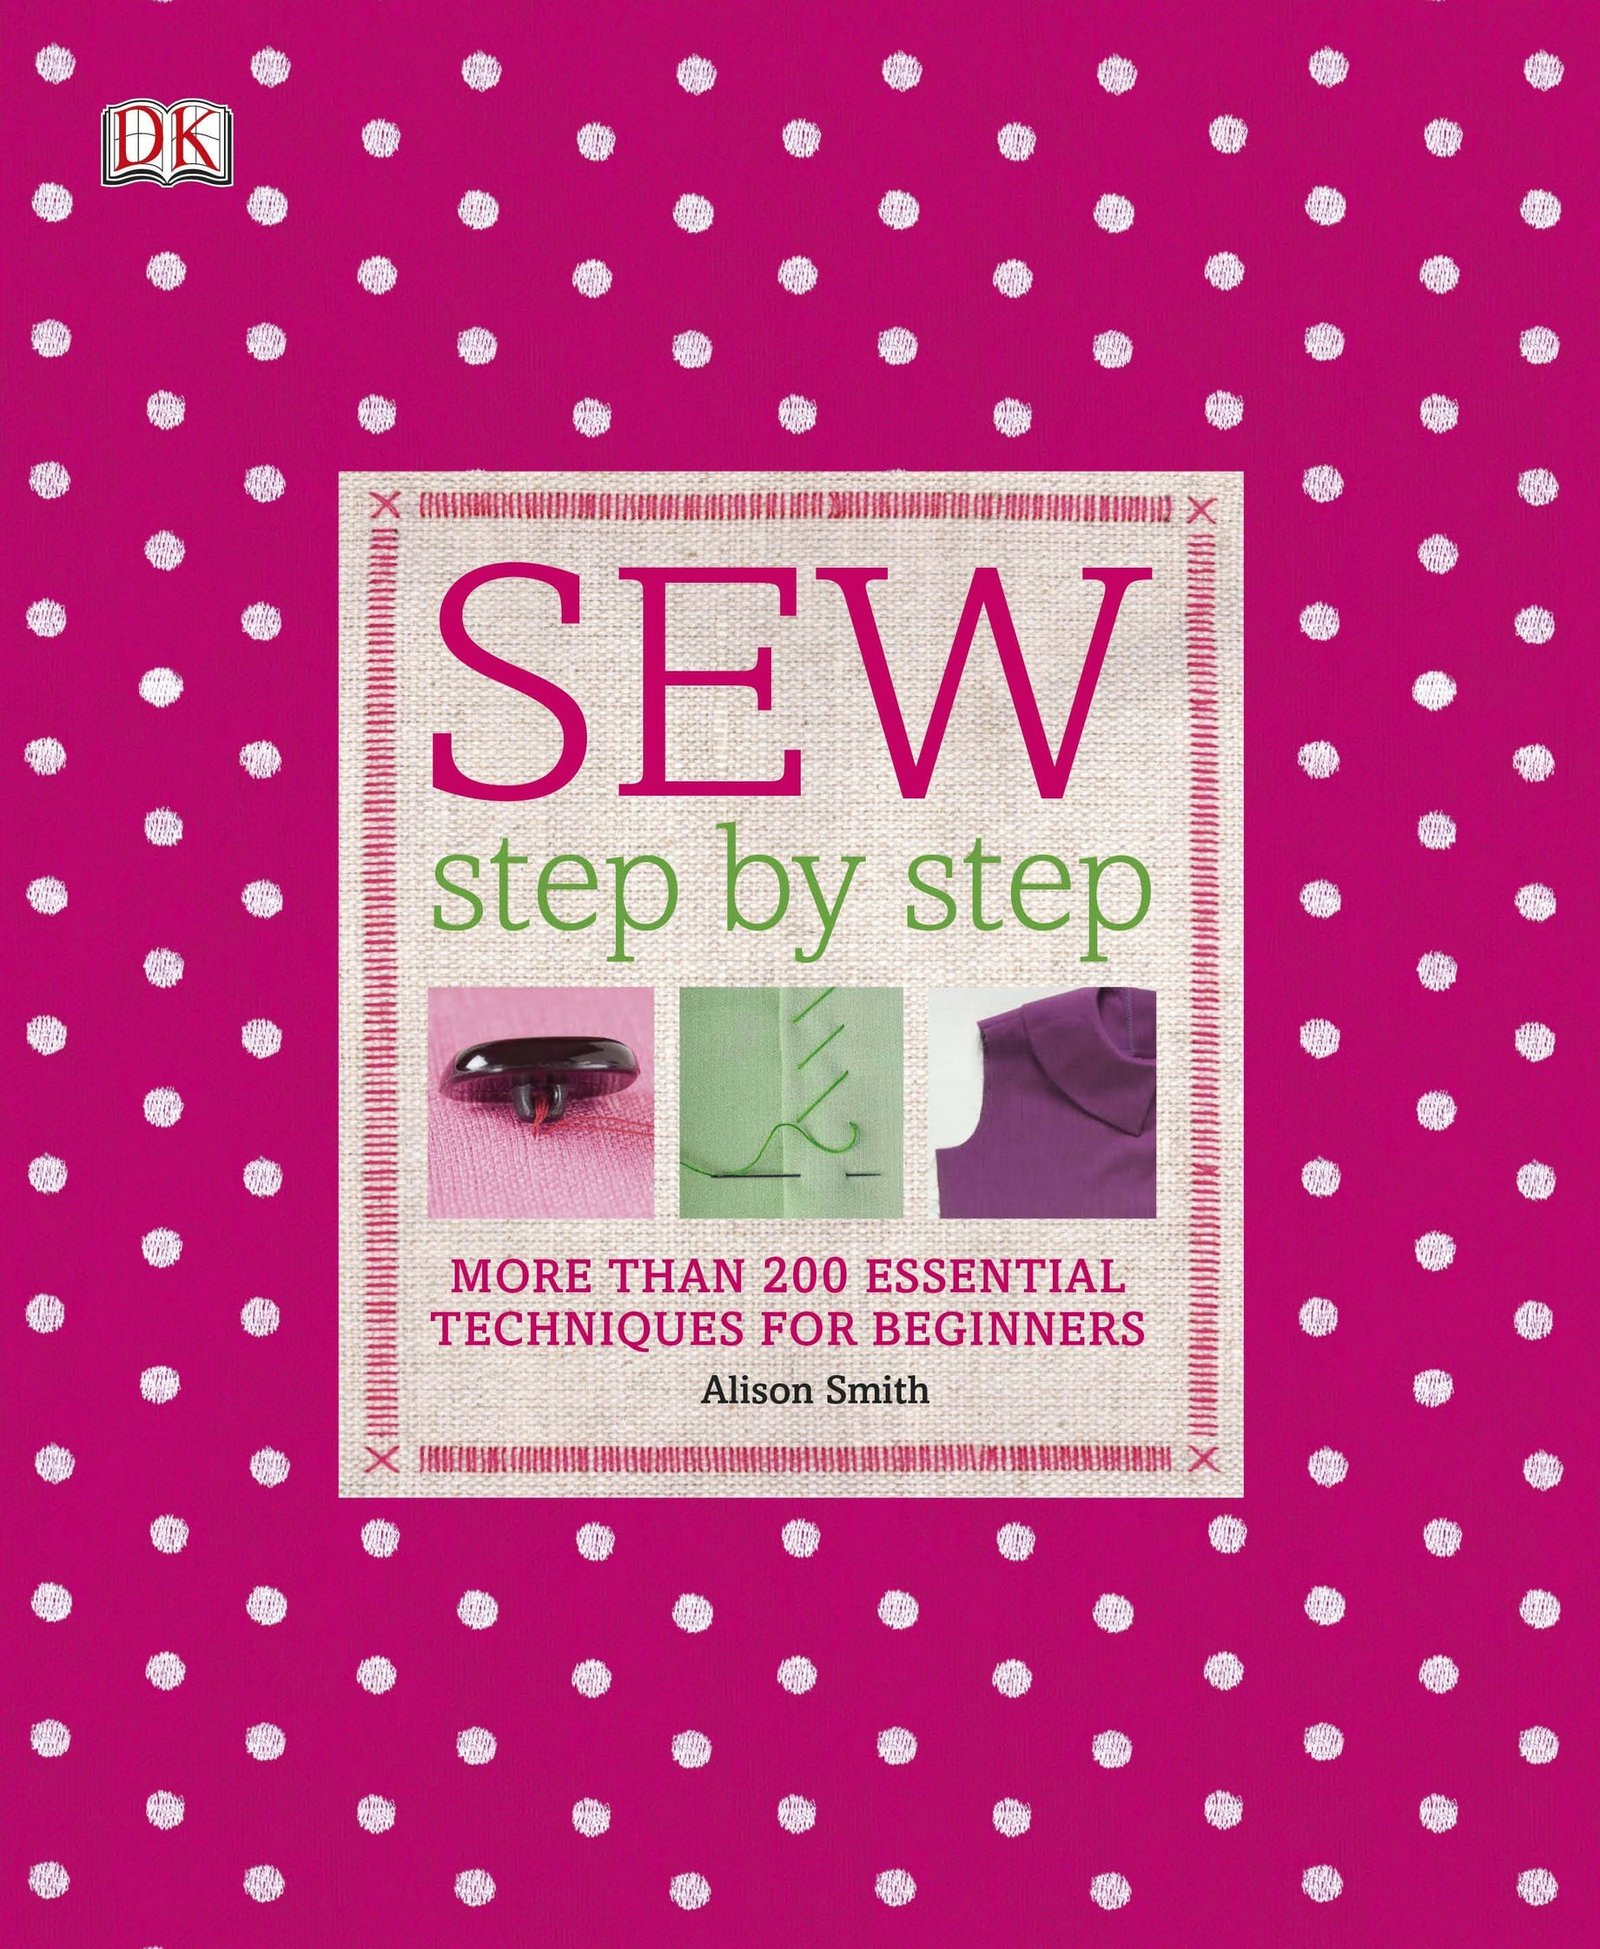 Book Review: Sew Step by Step - A Spoonful of Sugar